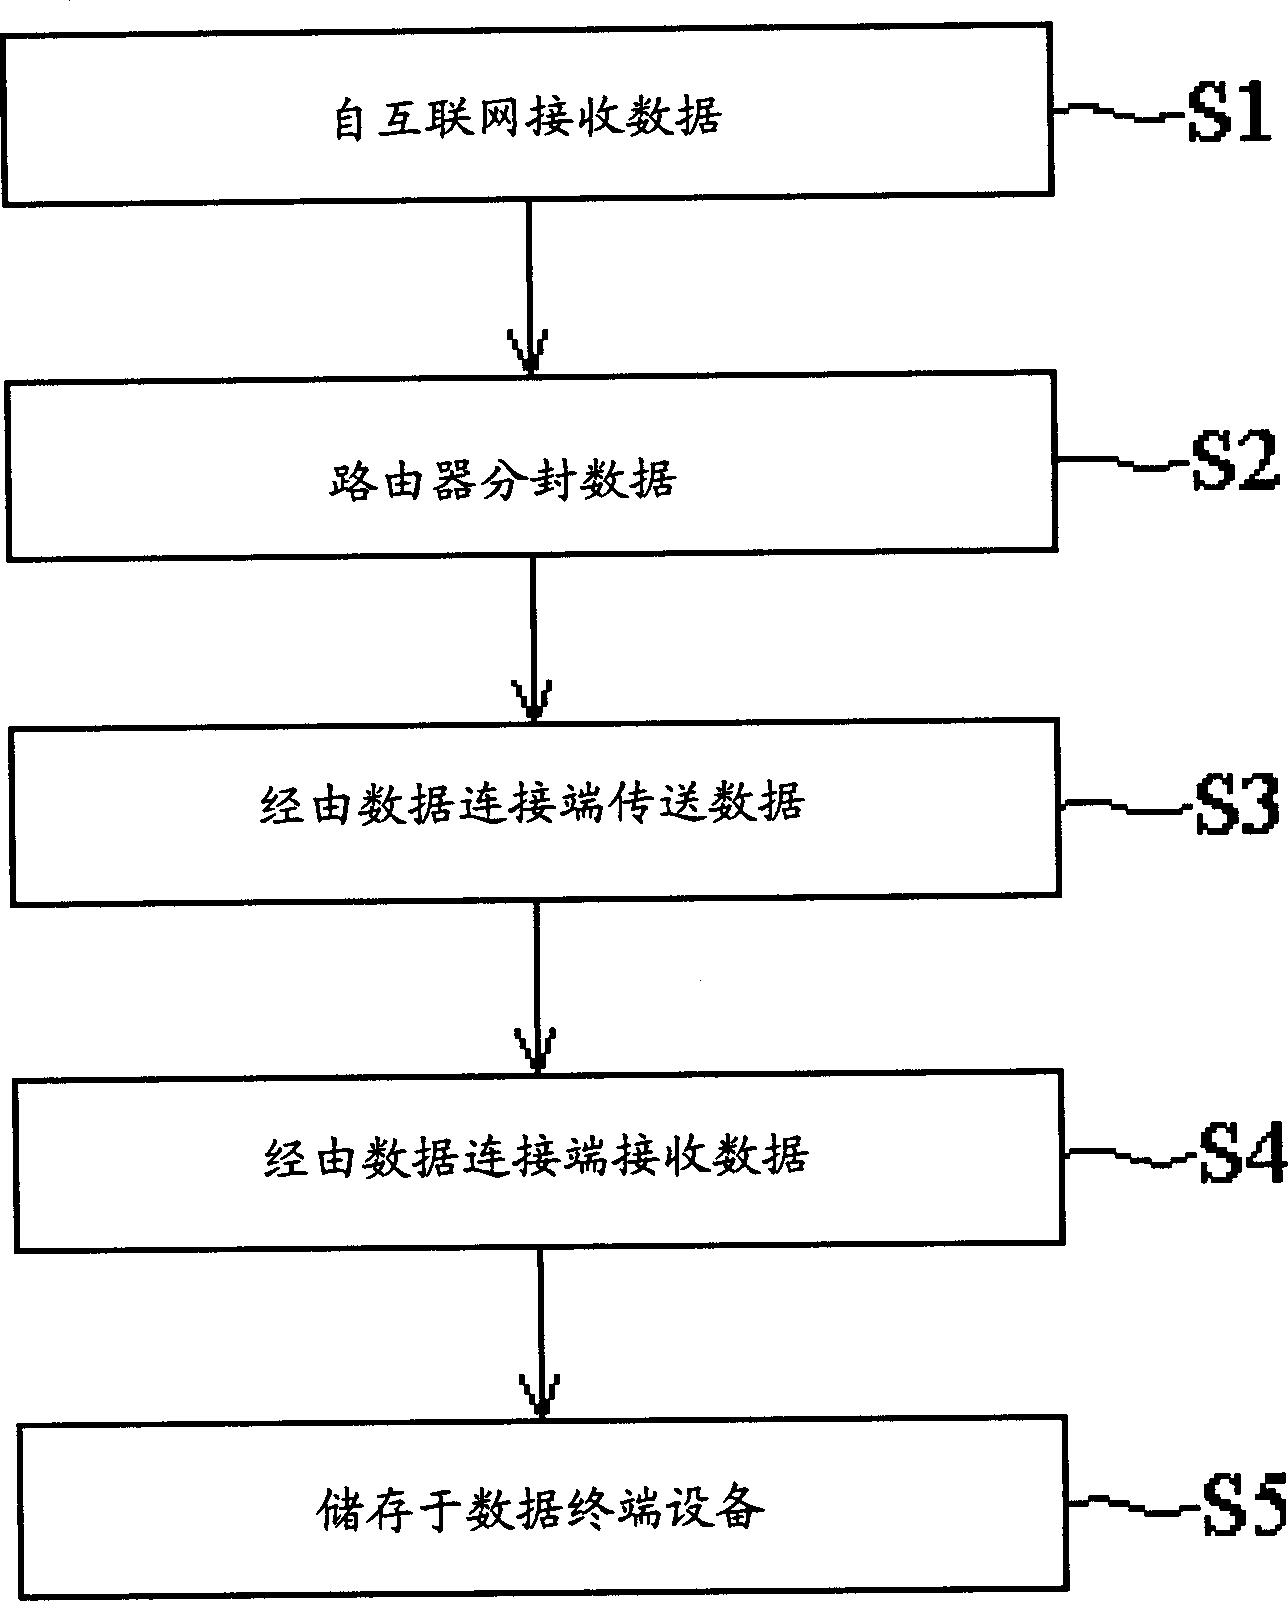 Mobile data receiving method and apparatus by computer